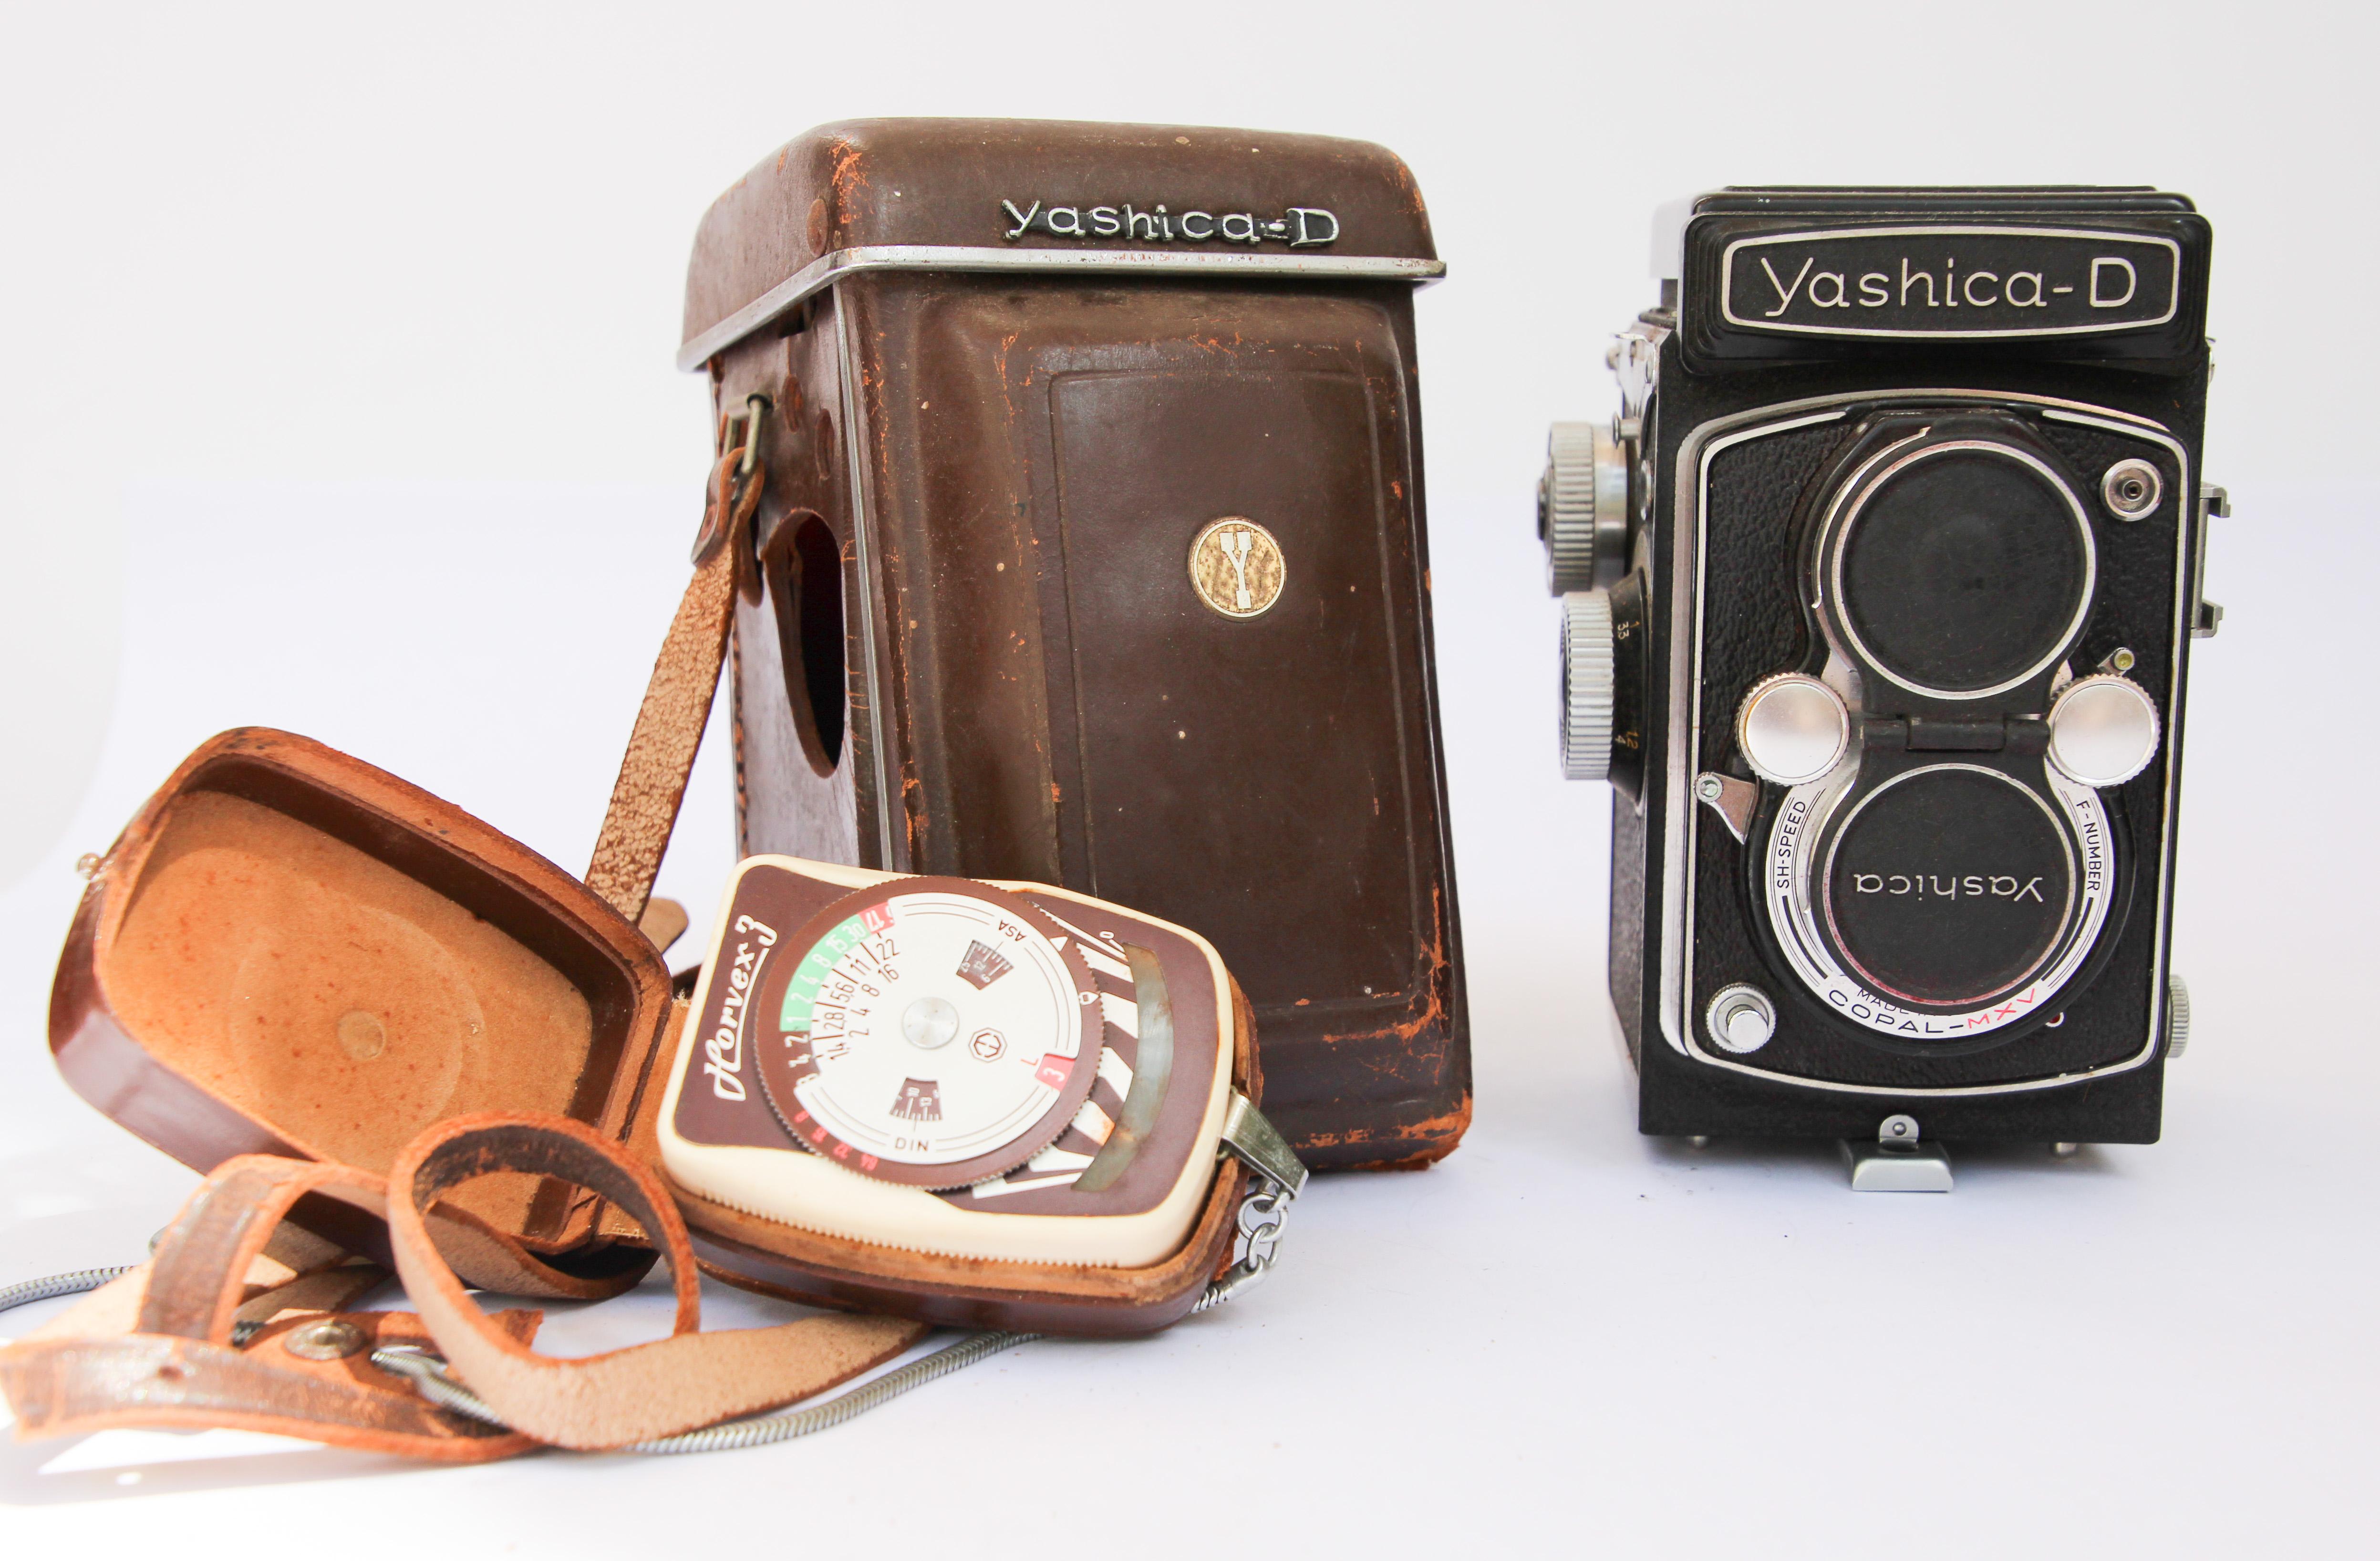 The Yashica D was manufactured between 1958 and 1972, it’s a pretty standard Twin Lens Reflex (TLR) camera that takes 120 film and creates 6×6 images.
Early models (which is what mine is), featured 80mm f/3.5, 3-element Yashikkor viewing and taking